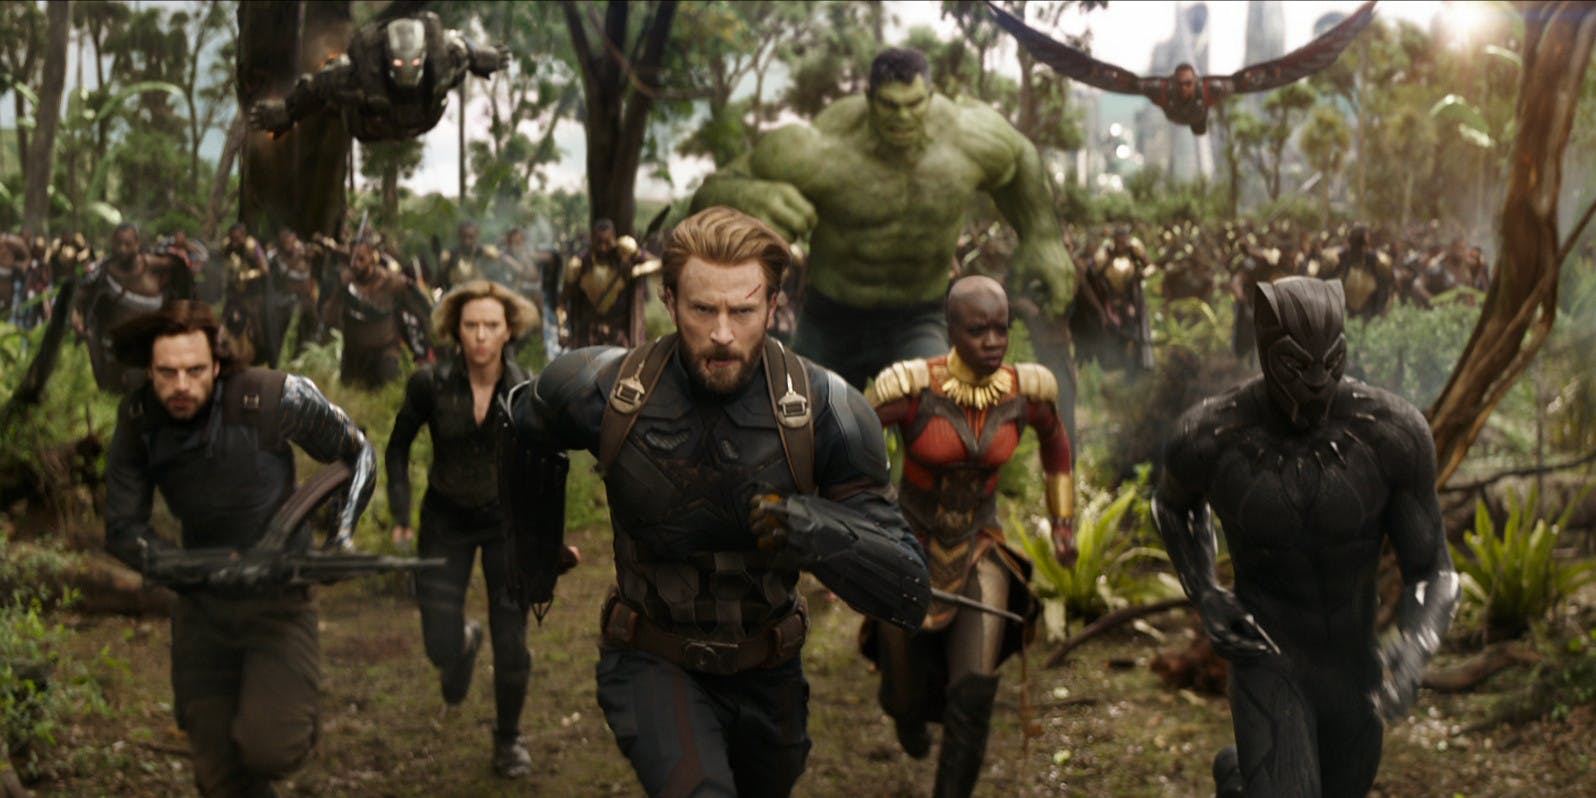 MOVIES: Avengers: Infinity War - Review